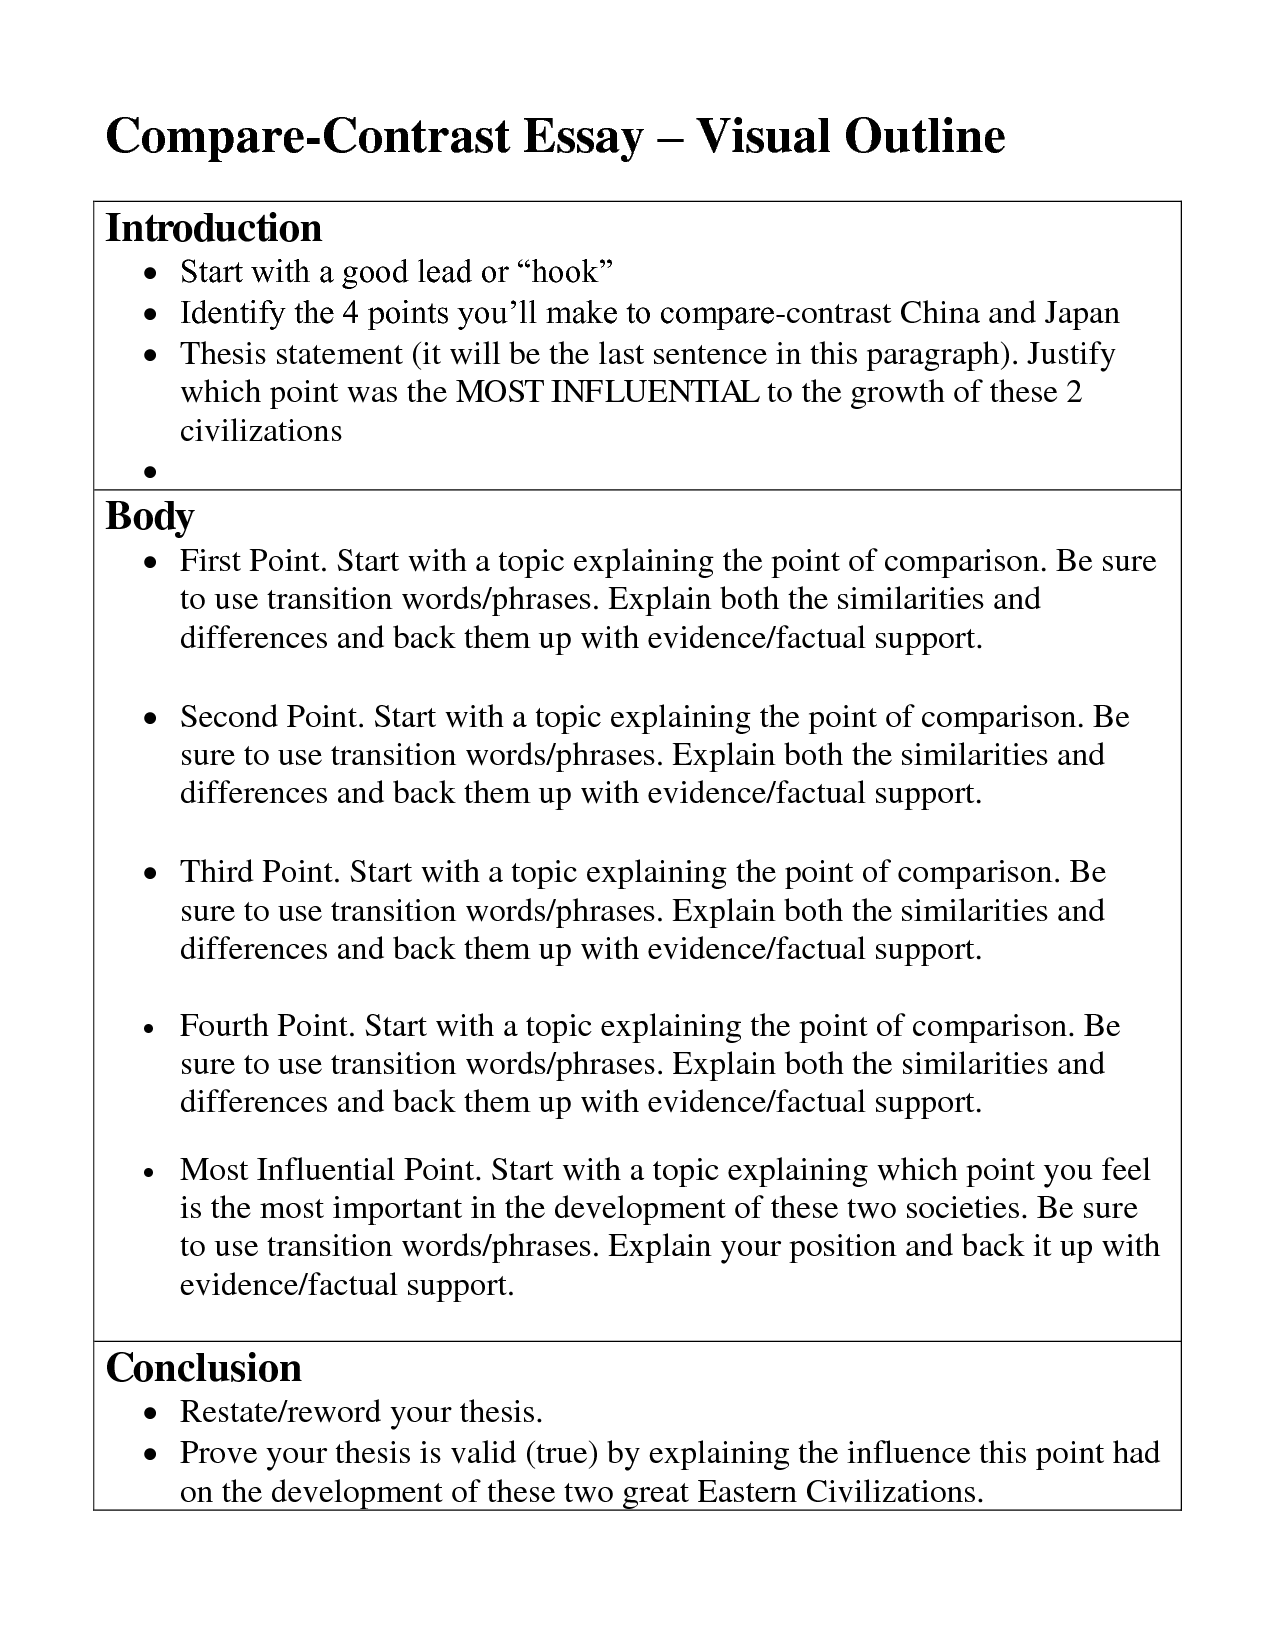 Compare and Contrast Essay Outline Format Image